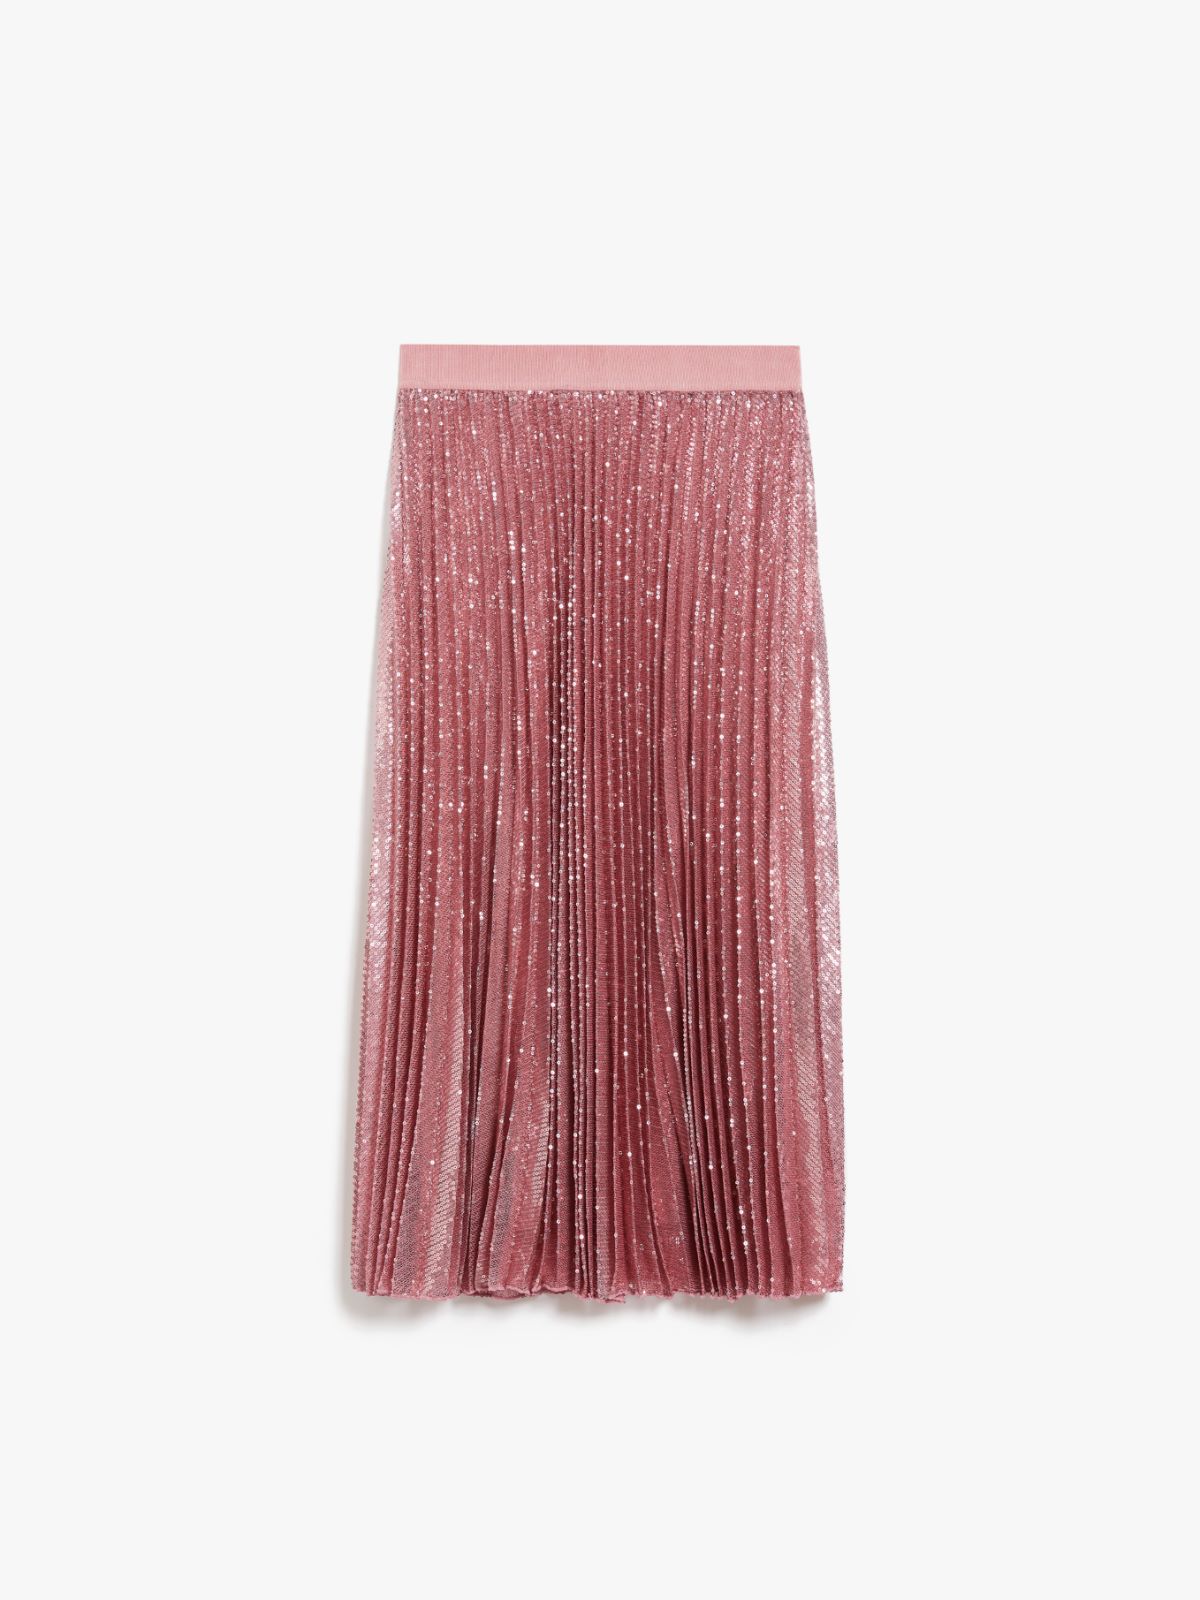 Tulle skirt with sequins - PINK - Weekend Max Mara - 5